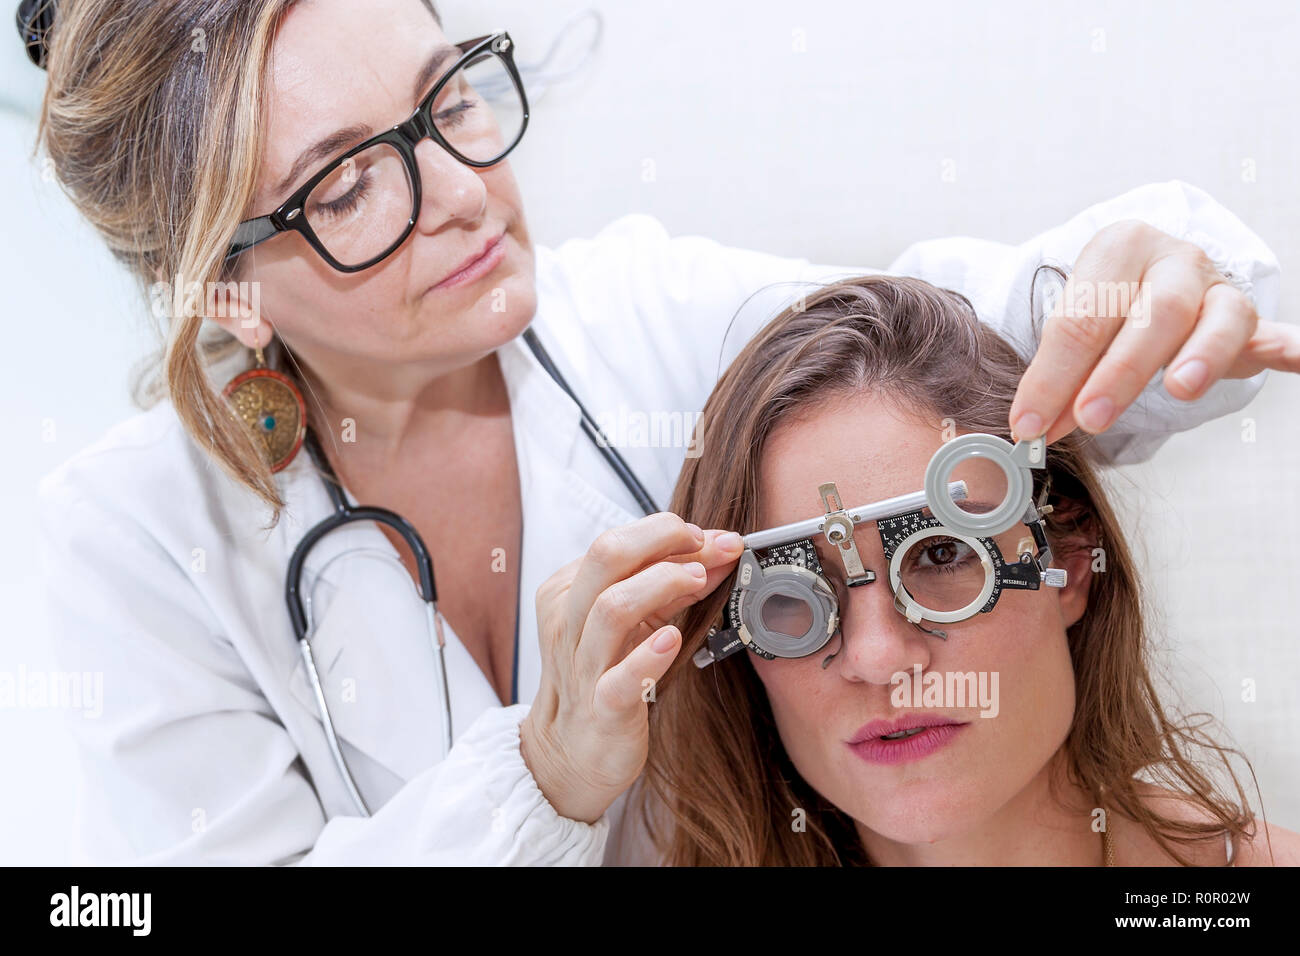 specialist in ophthalmology test new lenses on a patient with phoropter Stock Photo